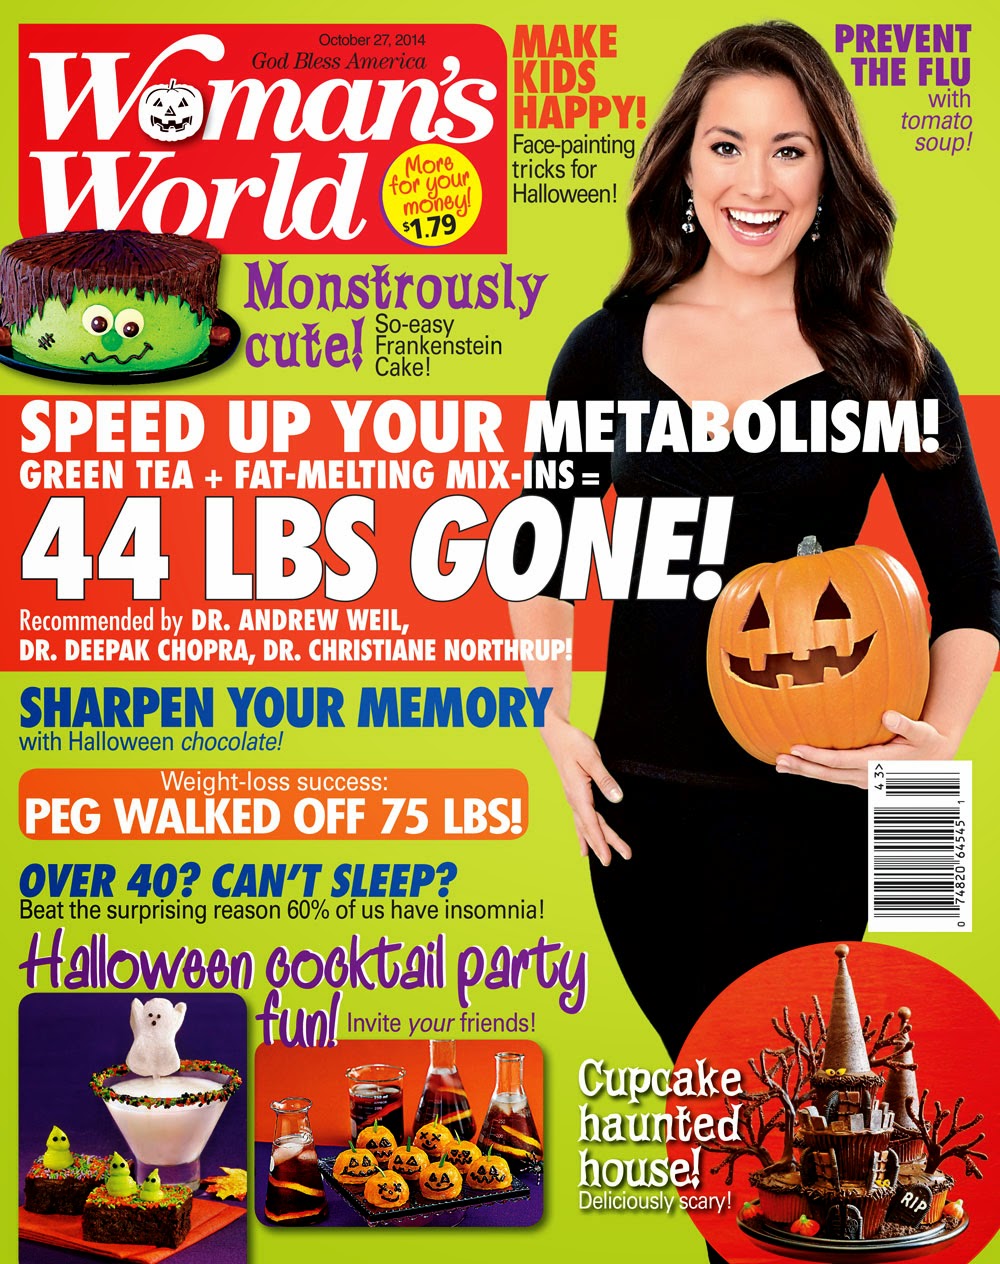 My cake on the cover of Woman's World magazine!